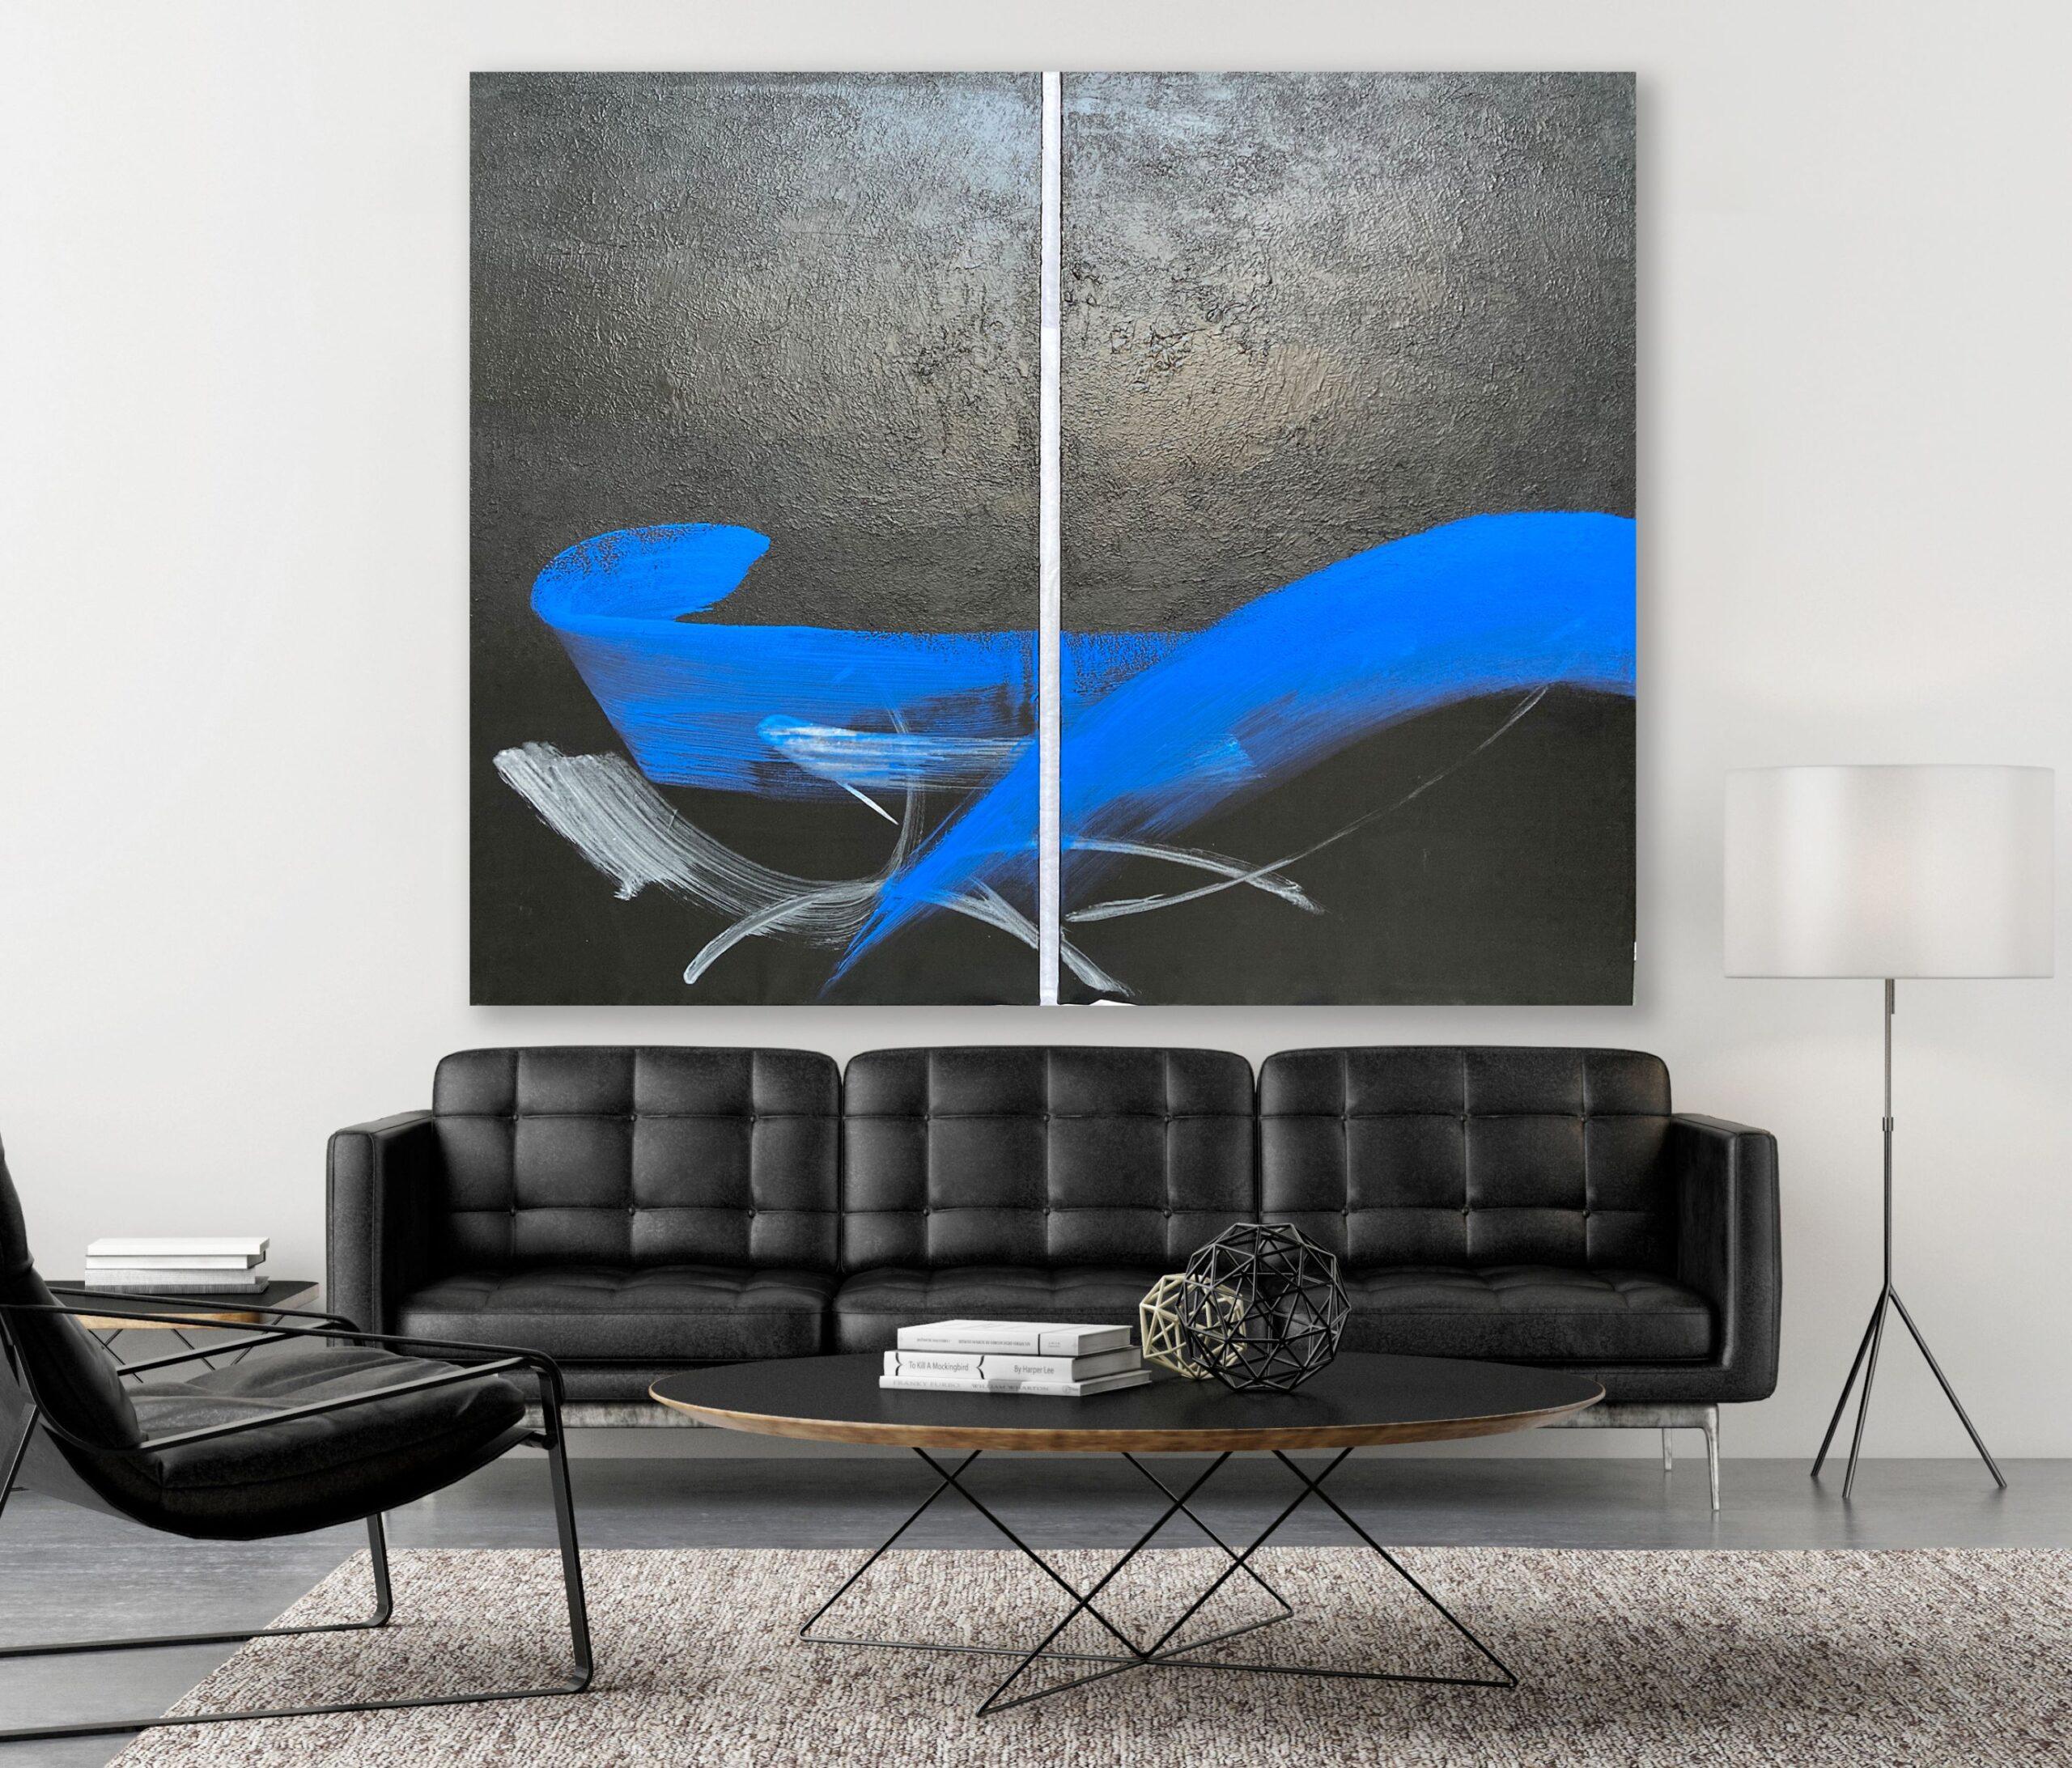 TN831-D by Hachiro Kanno - Calligraphy-based abstract painting, black and blue For Sale 1